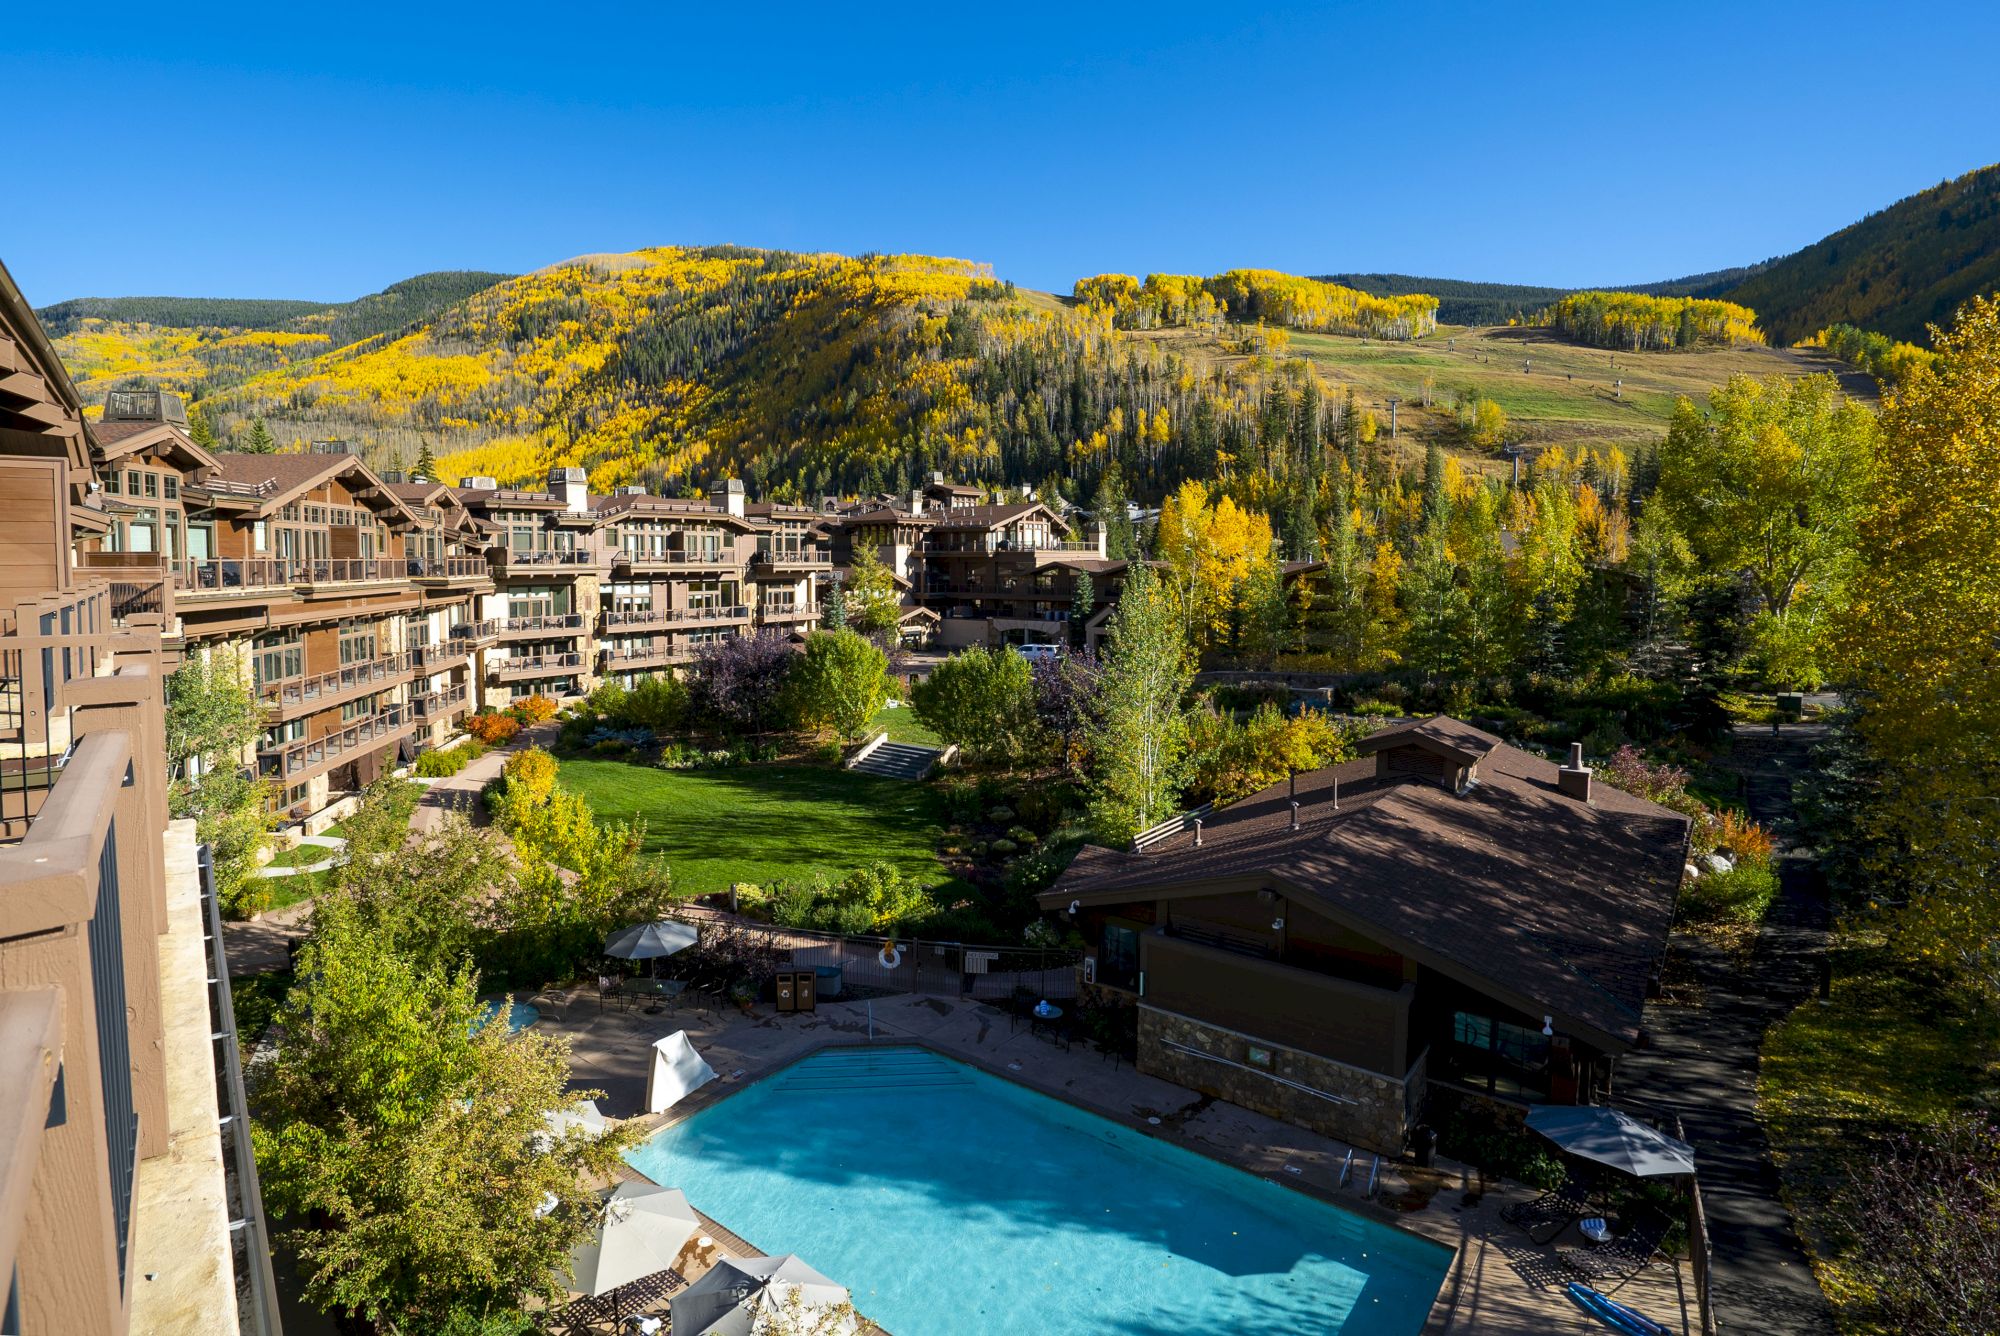 The image shows a resort with a pool, surrounded by buildings and lush hills with fall foliage under a clear blue sky.